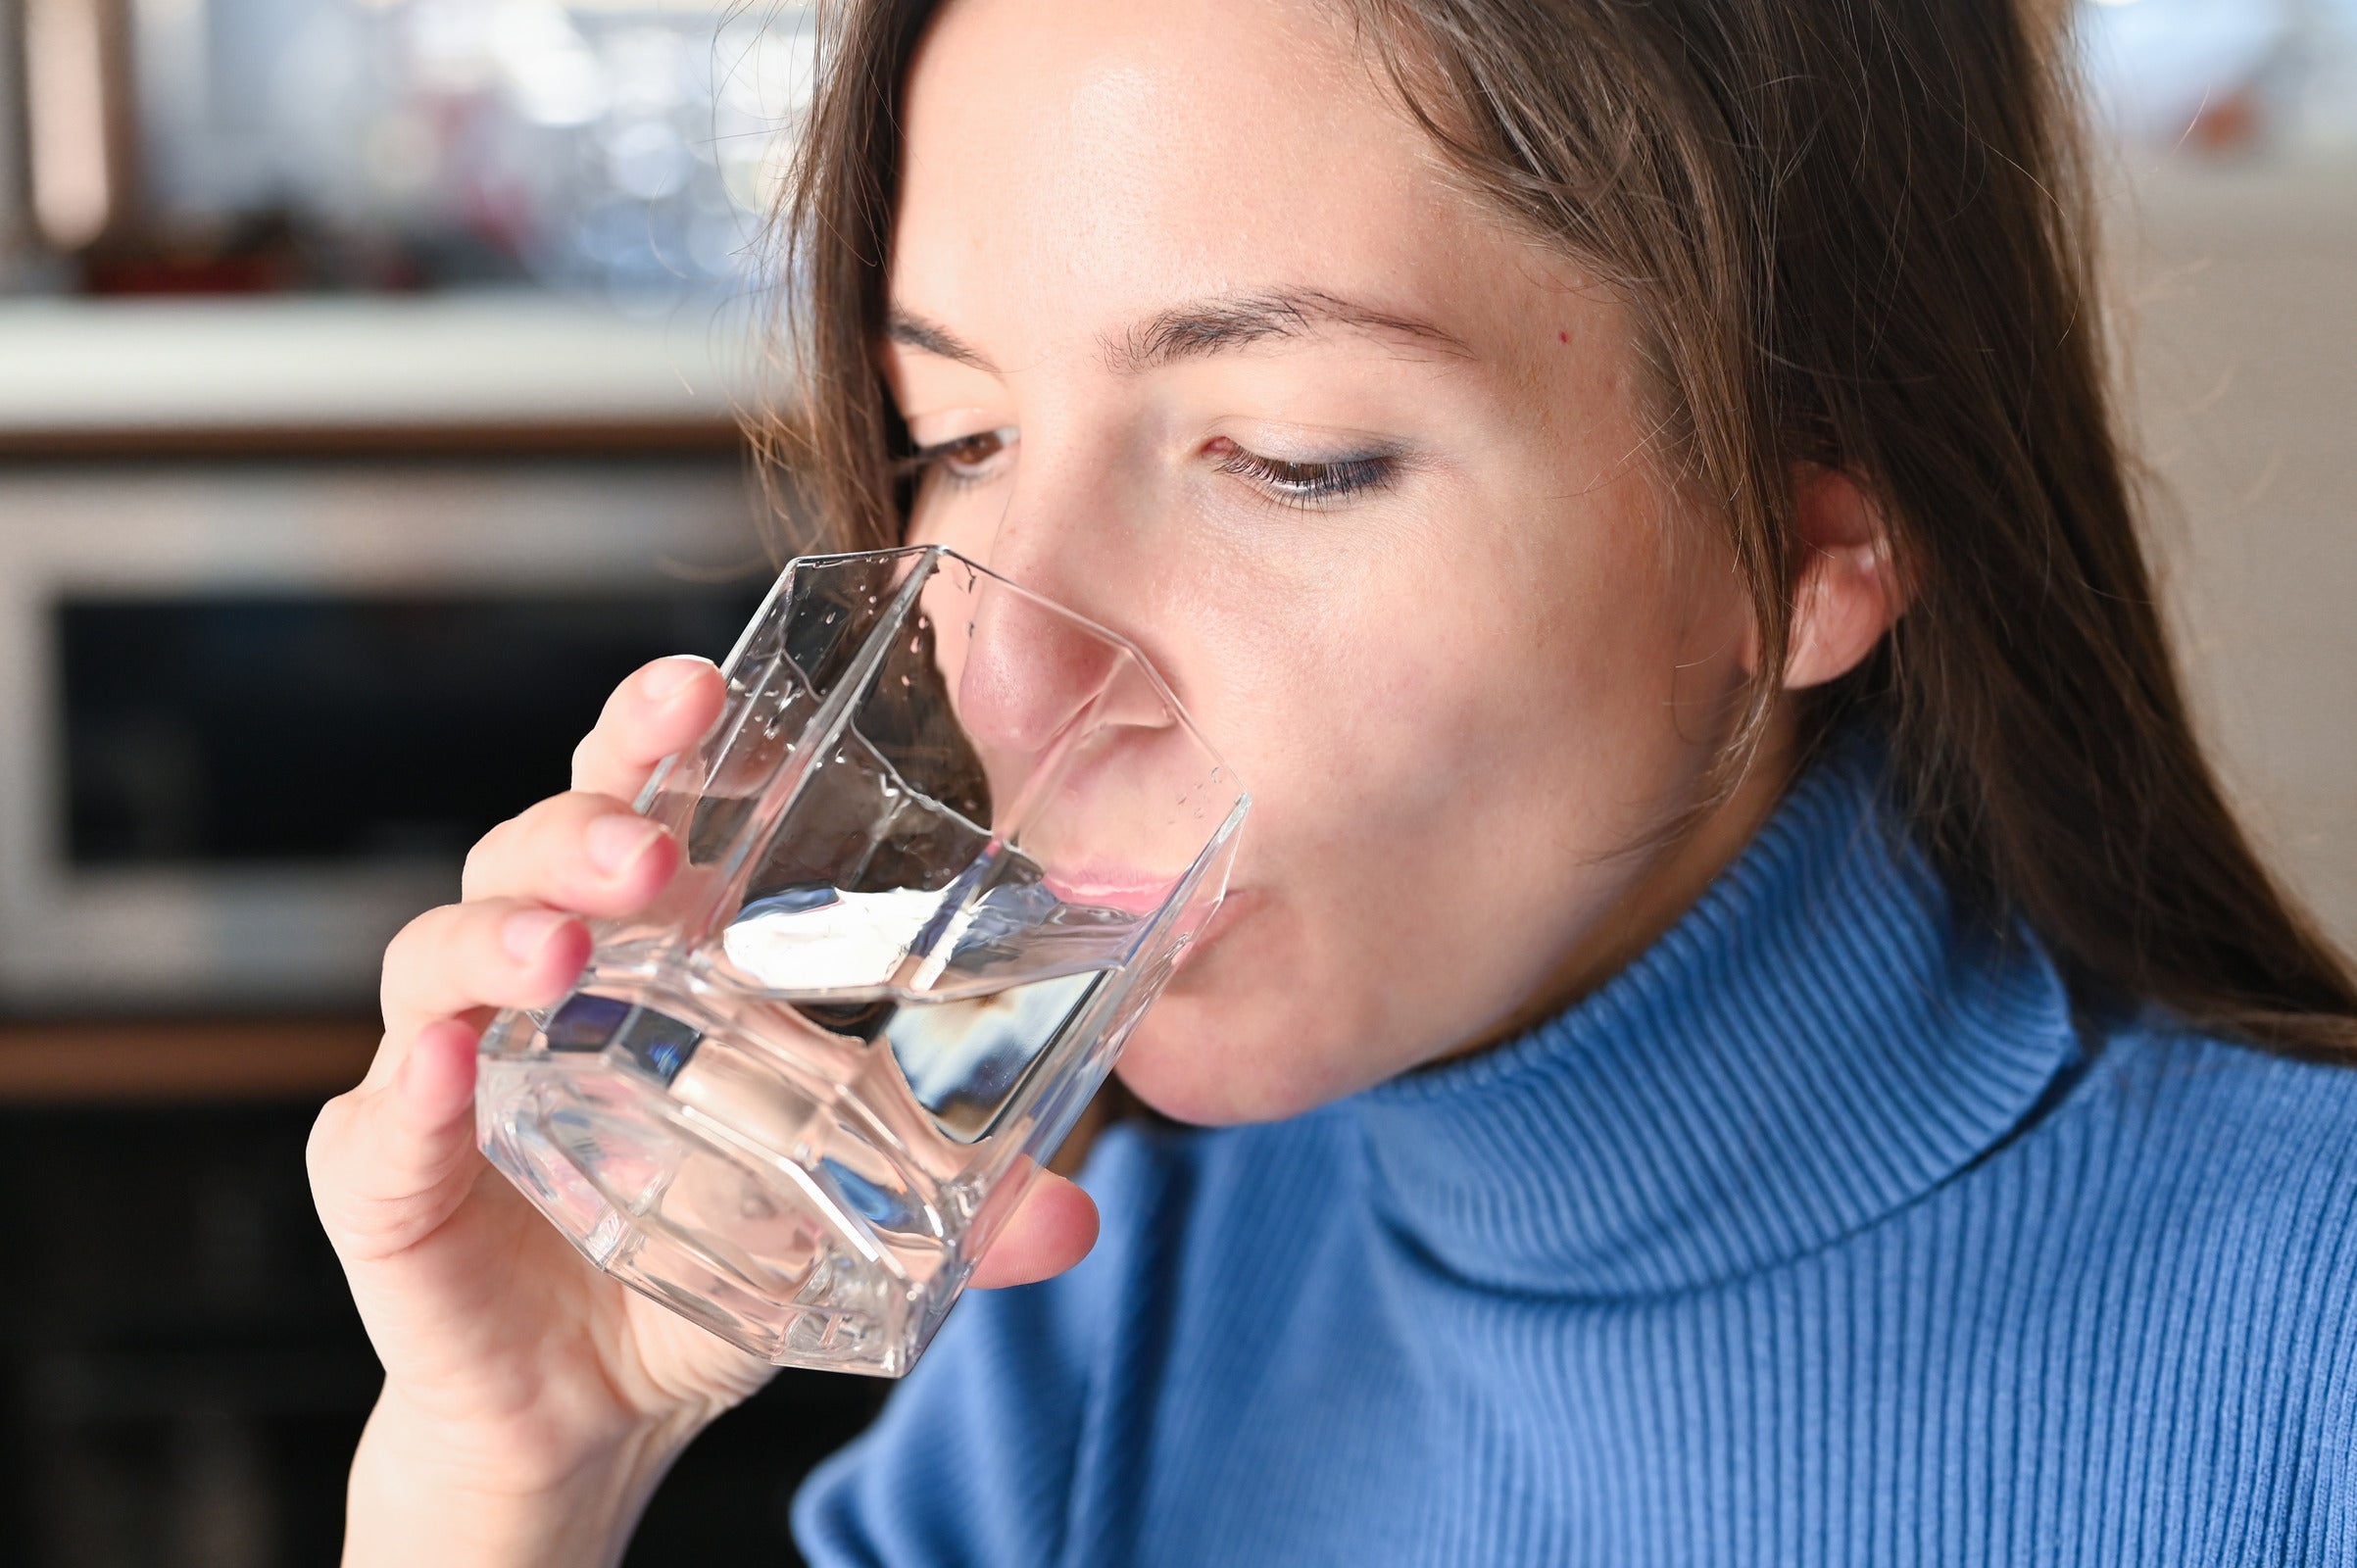 Keeping hydrated can prevent hemorrhoid mucus discharge